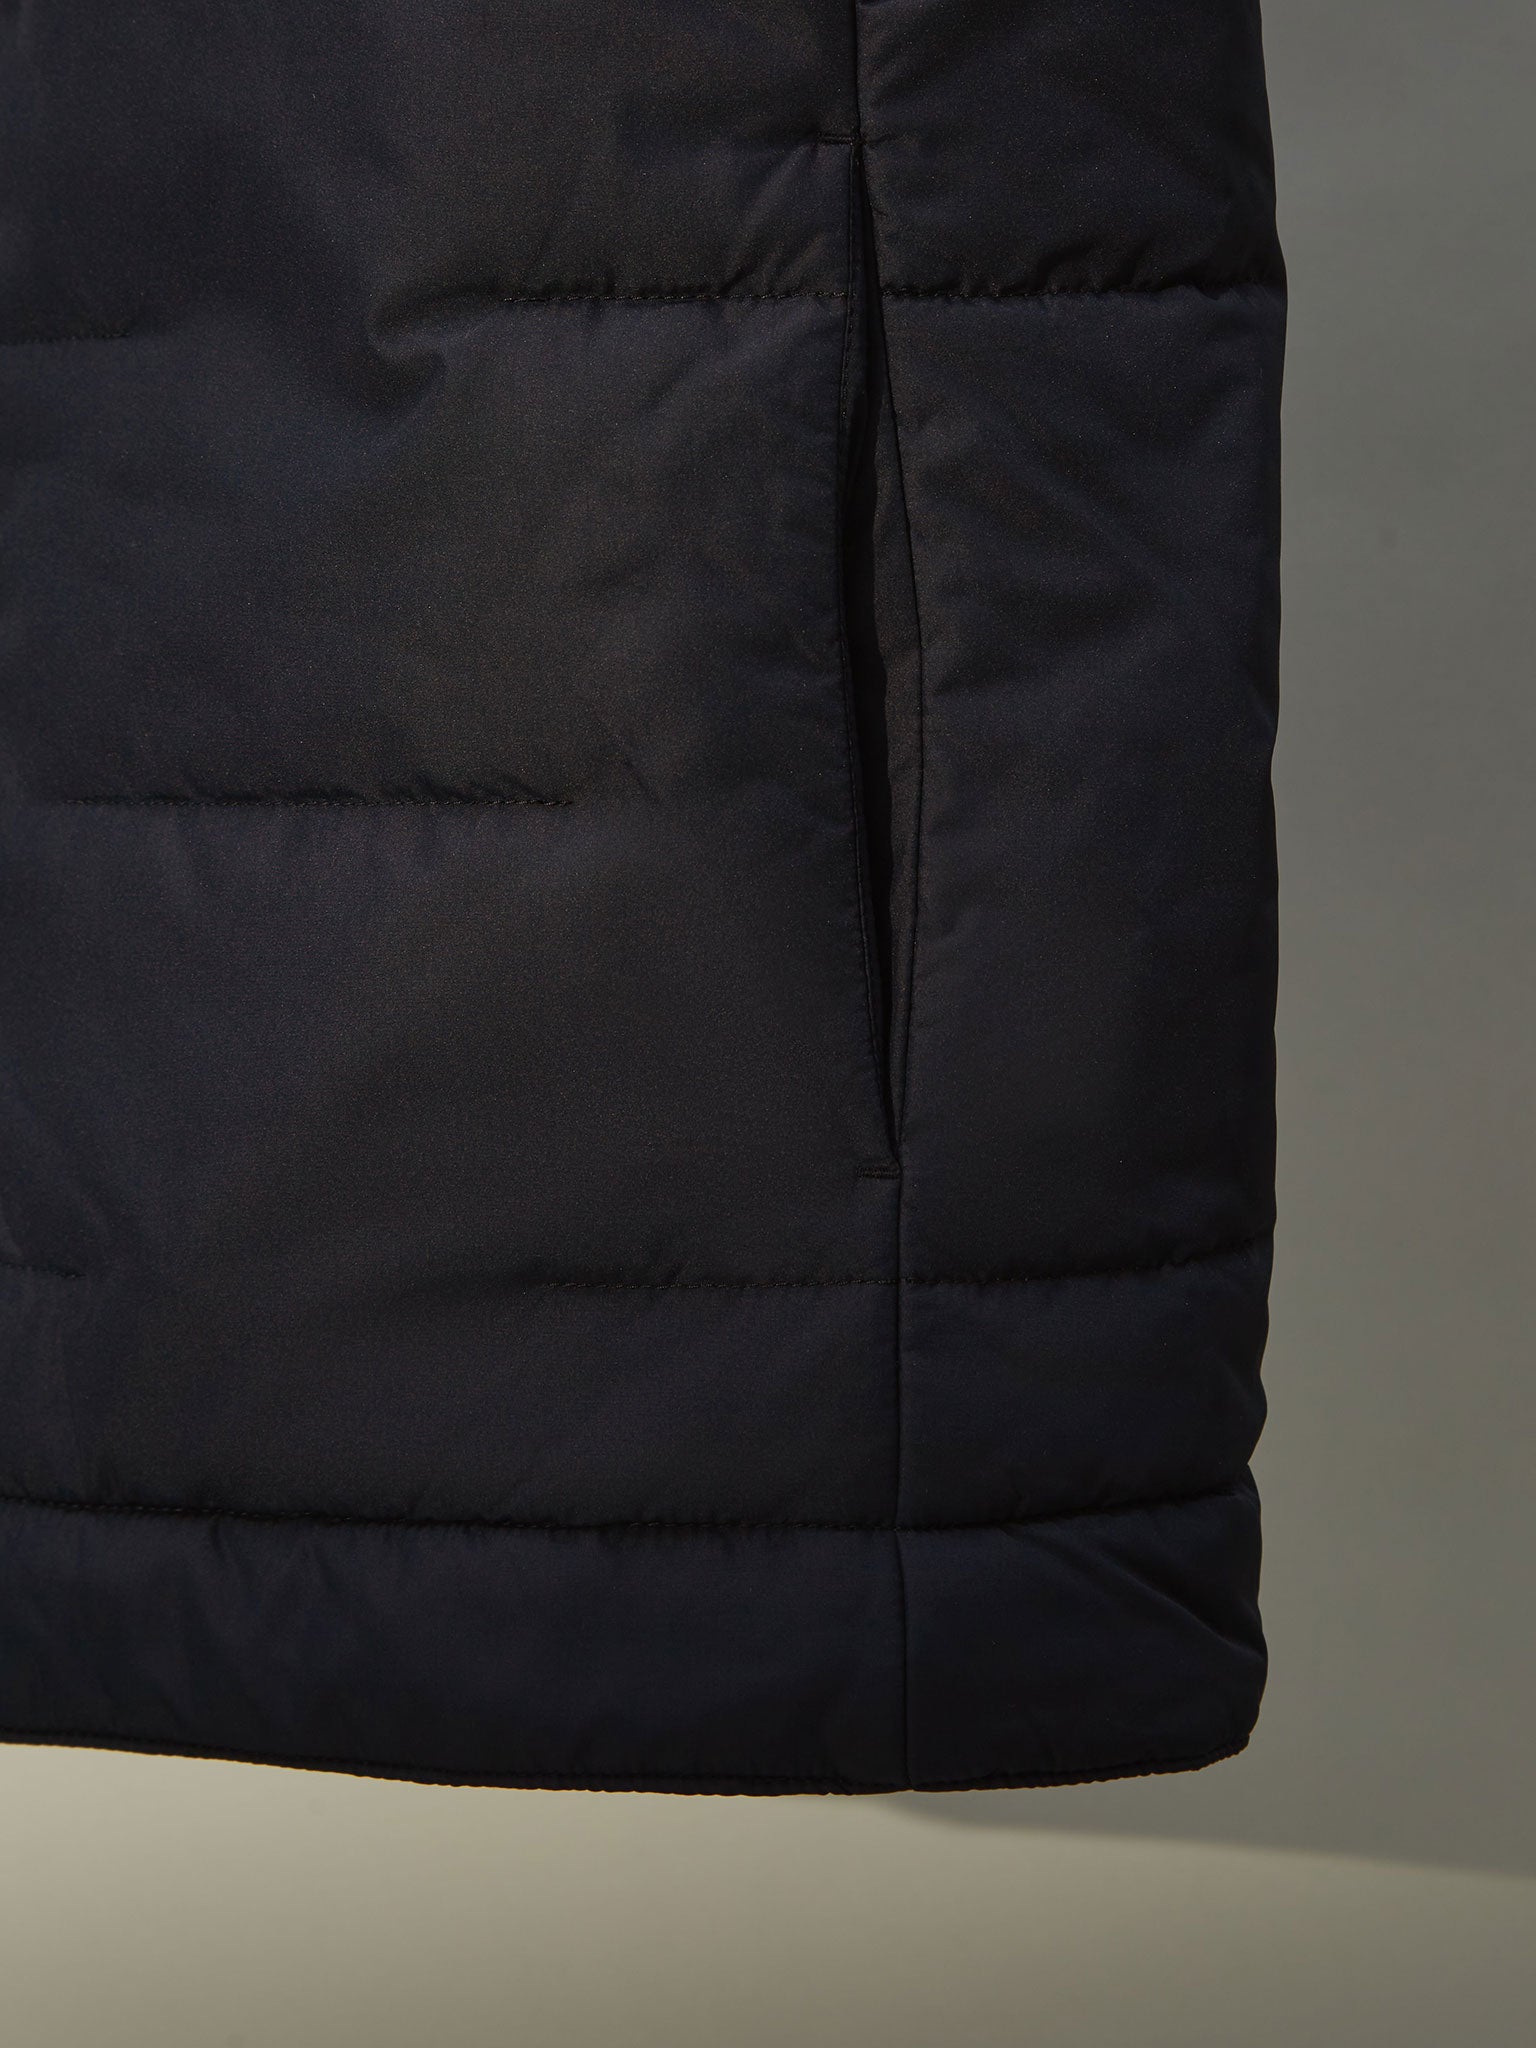 Men's Blue Gilet - Lightweight and Comfortable, Ideal for Layering